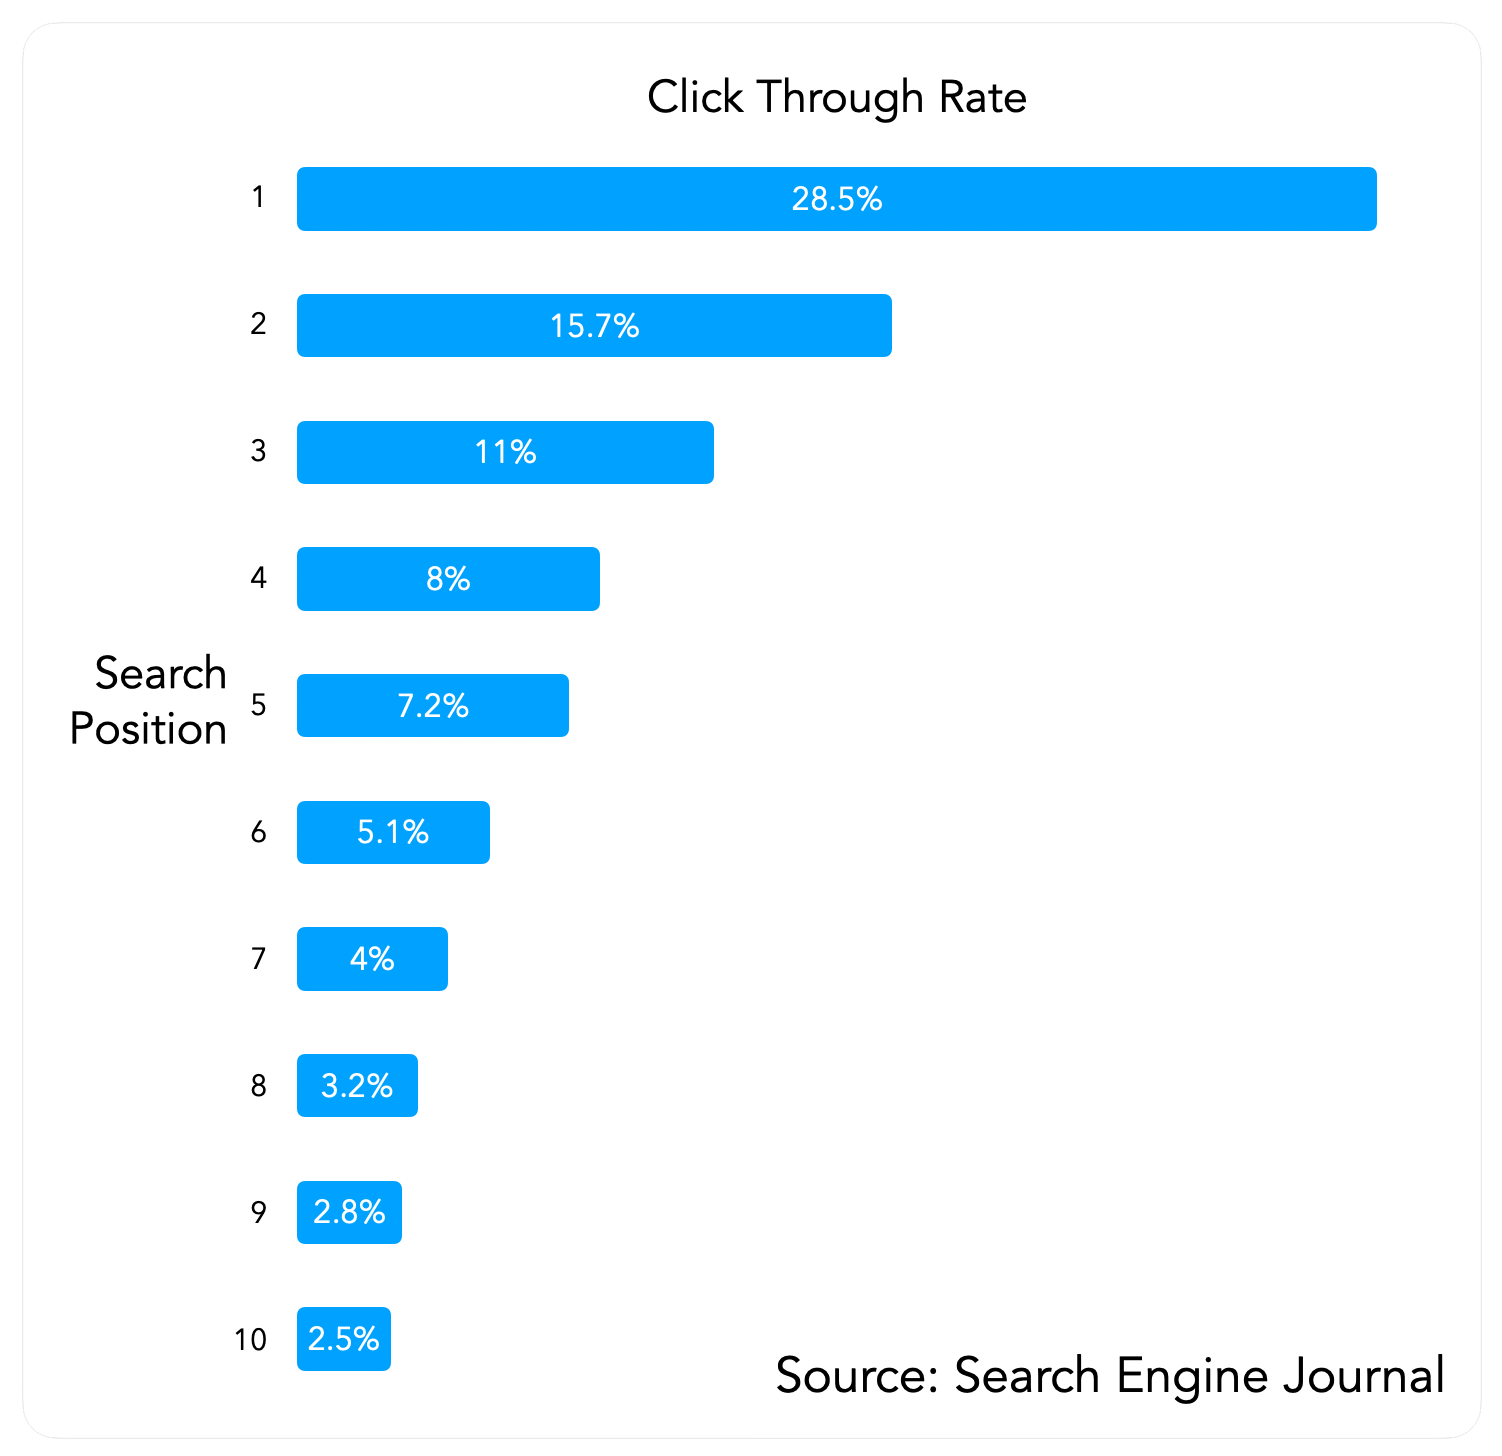 a graph showing the click through rate of search engines